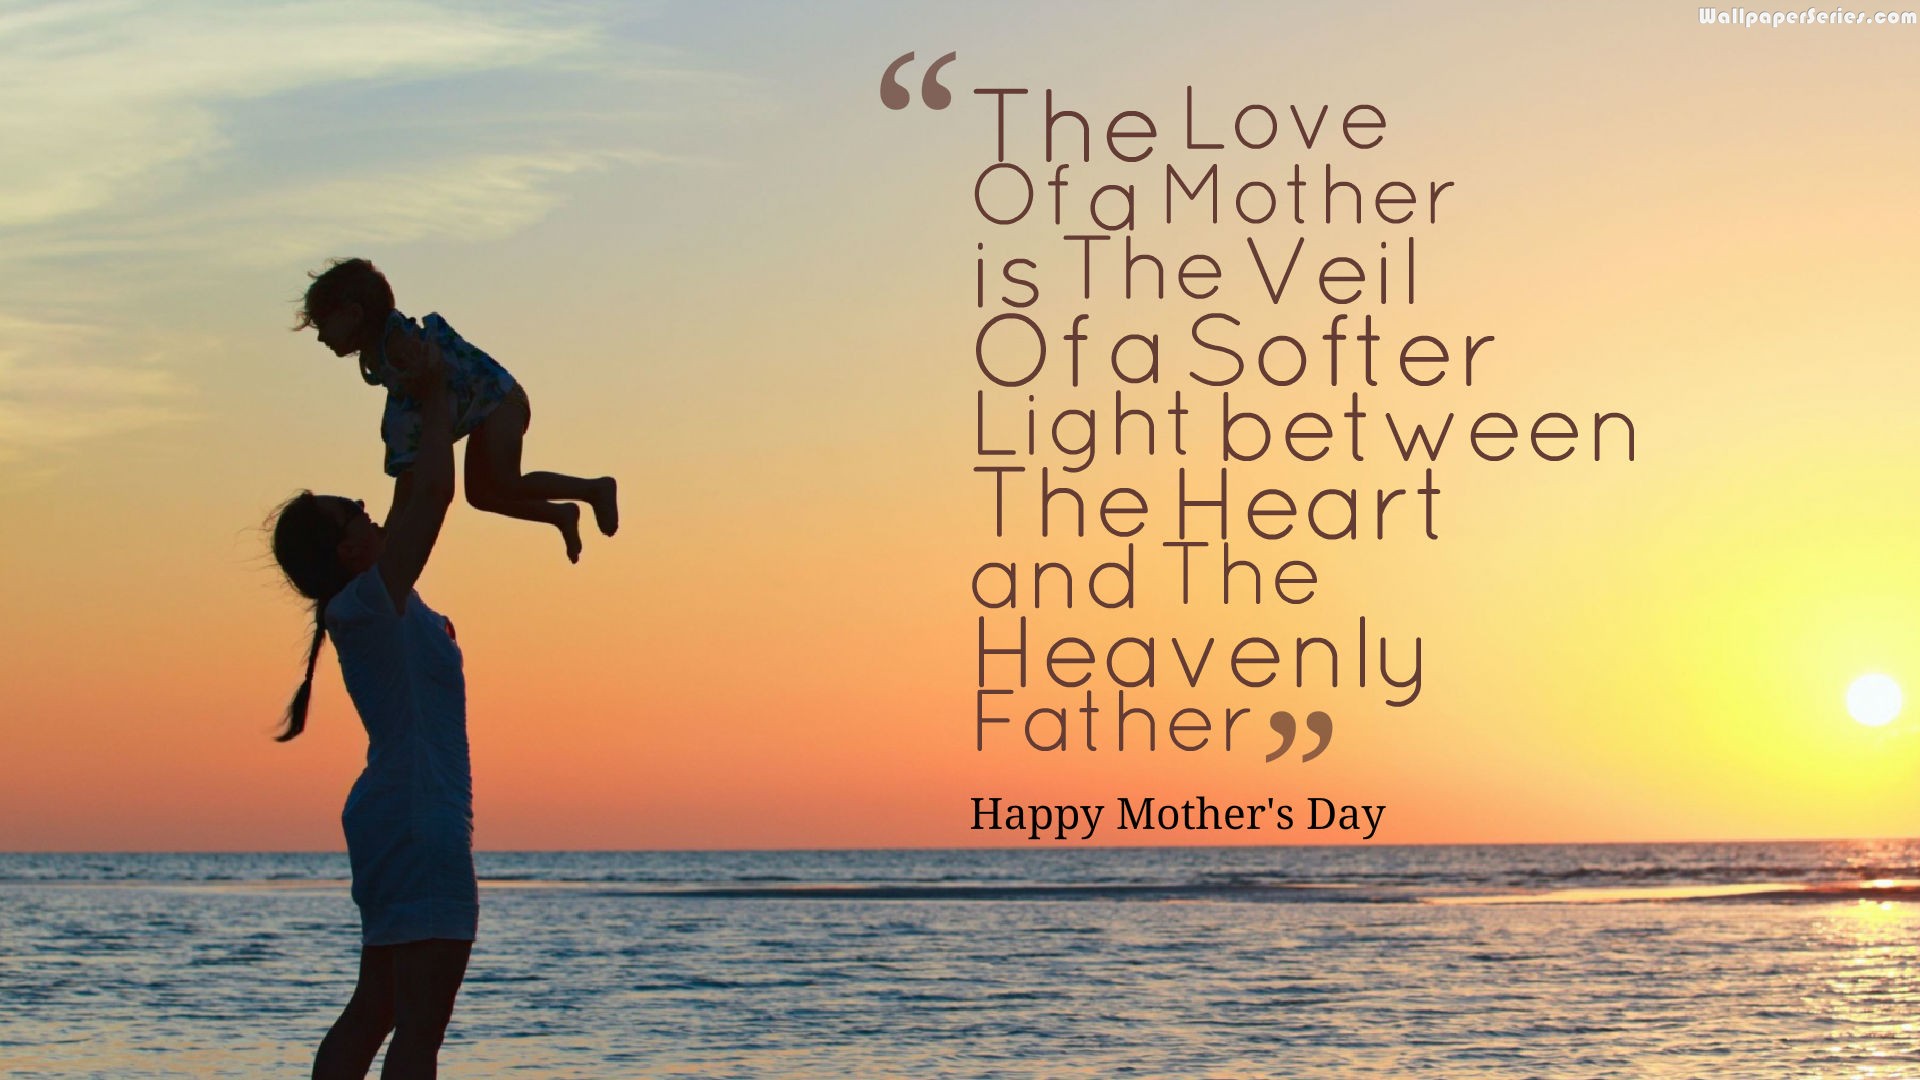 Heavenly Mothers Day Quotes Wallpaper HD